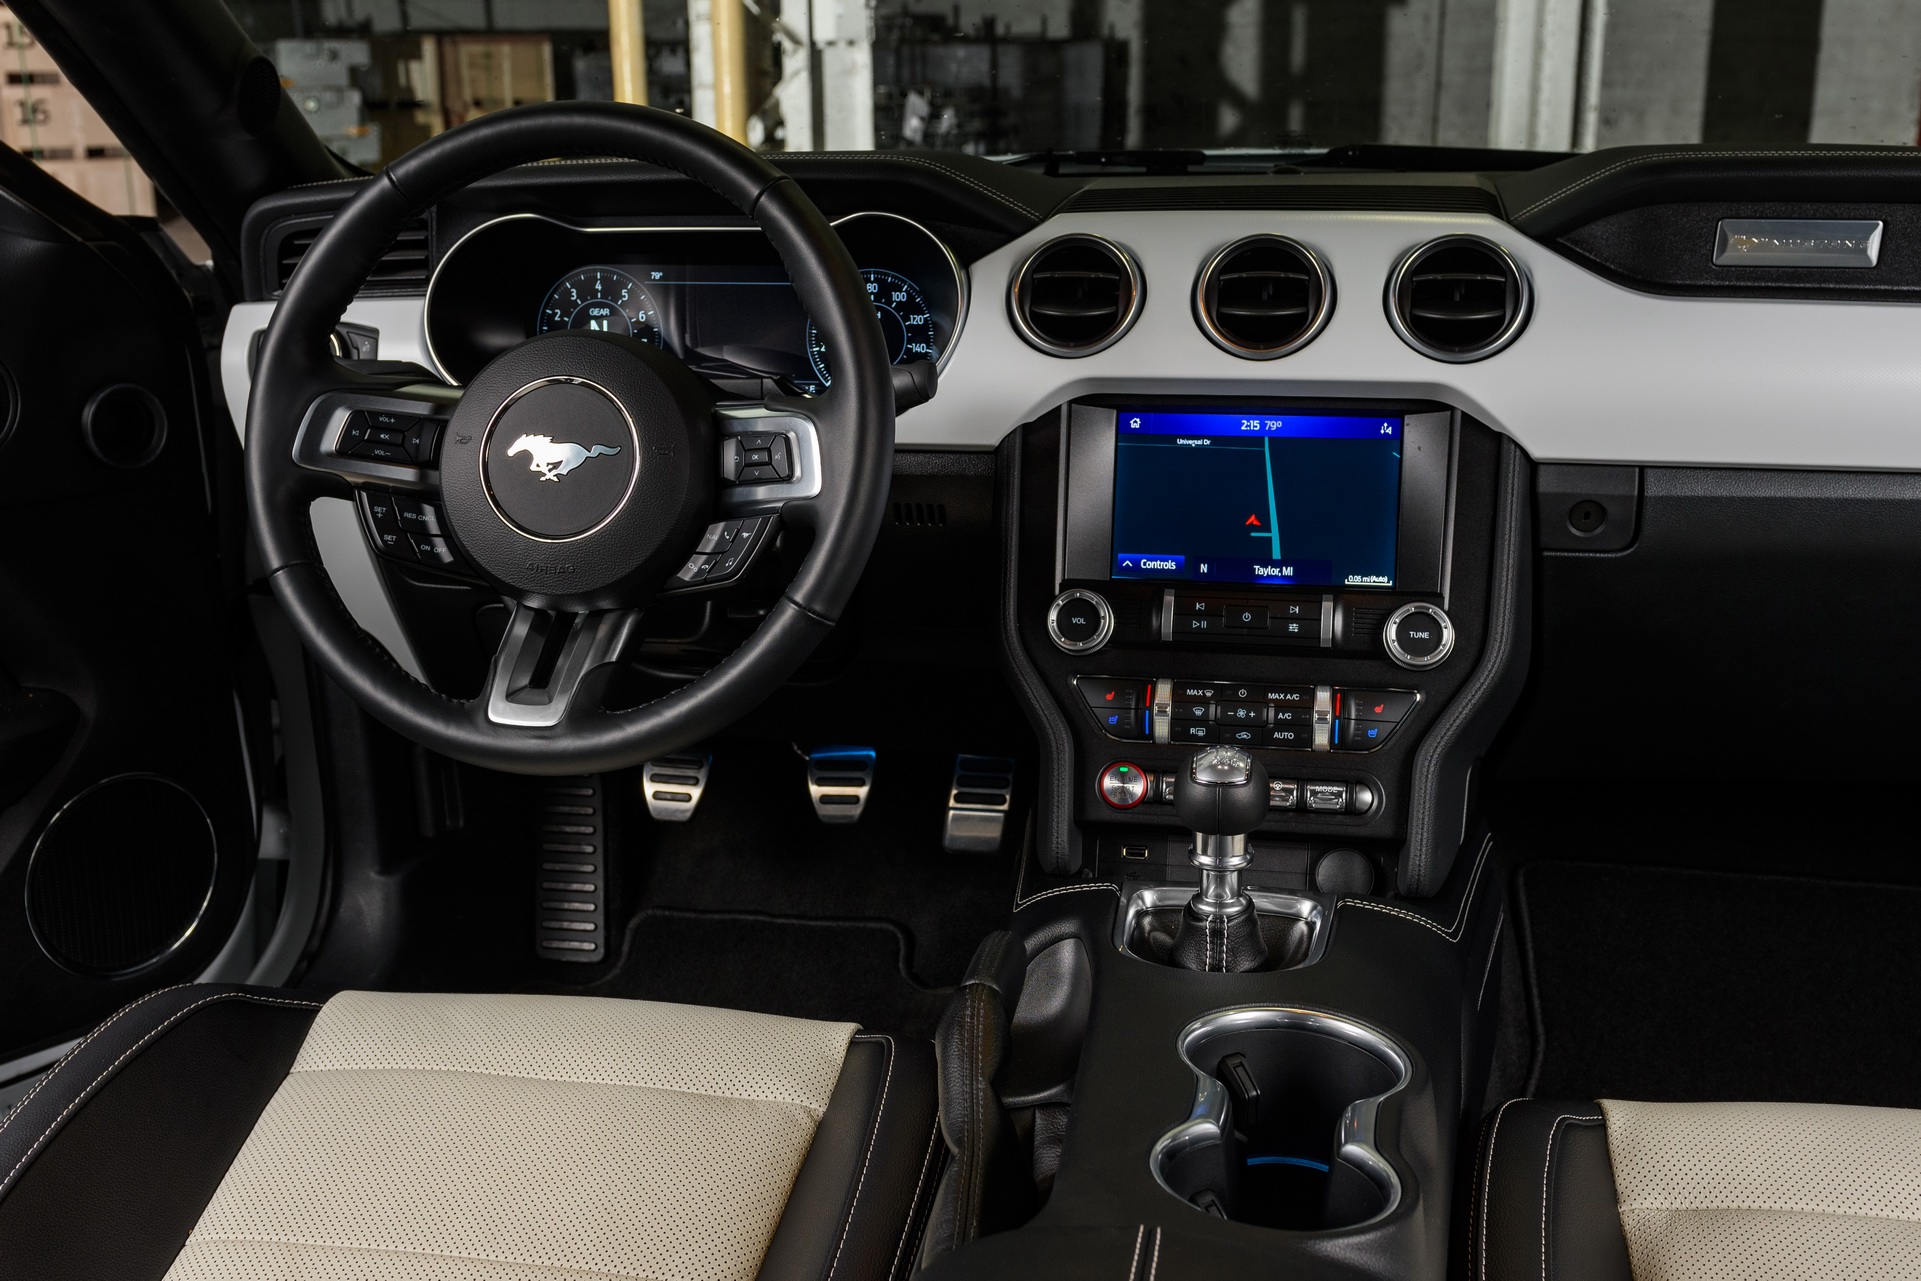 2022 Ford Mustang Ice White Appearance Package Interior Cockpit Wallpapers #16 of 24